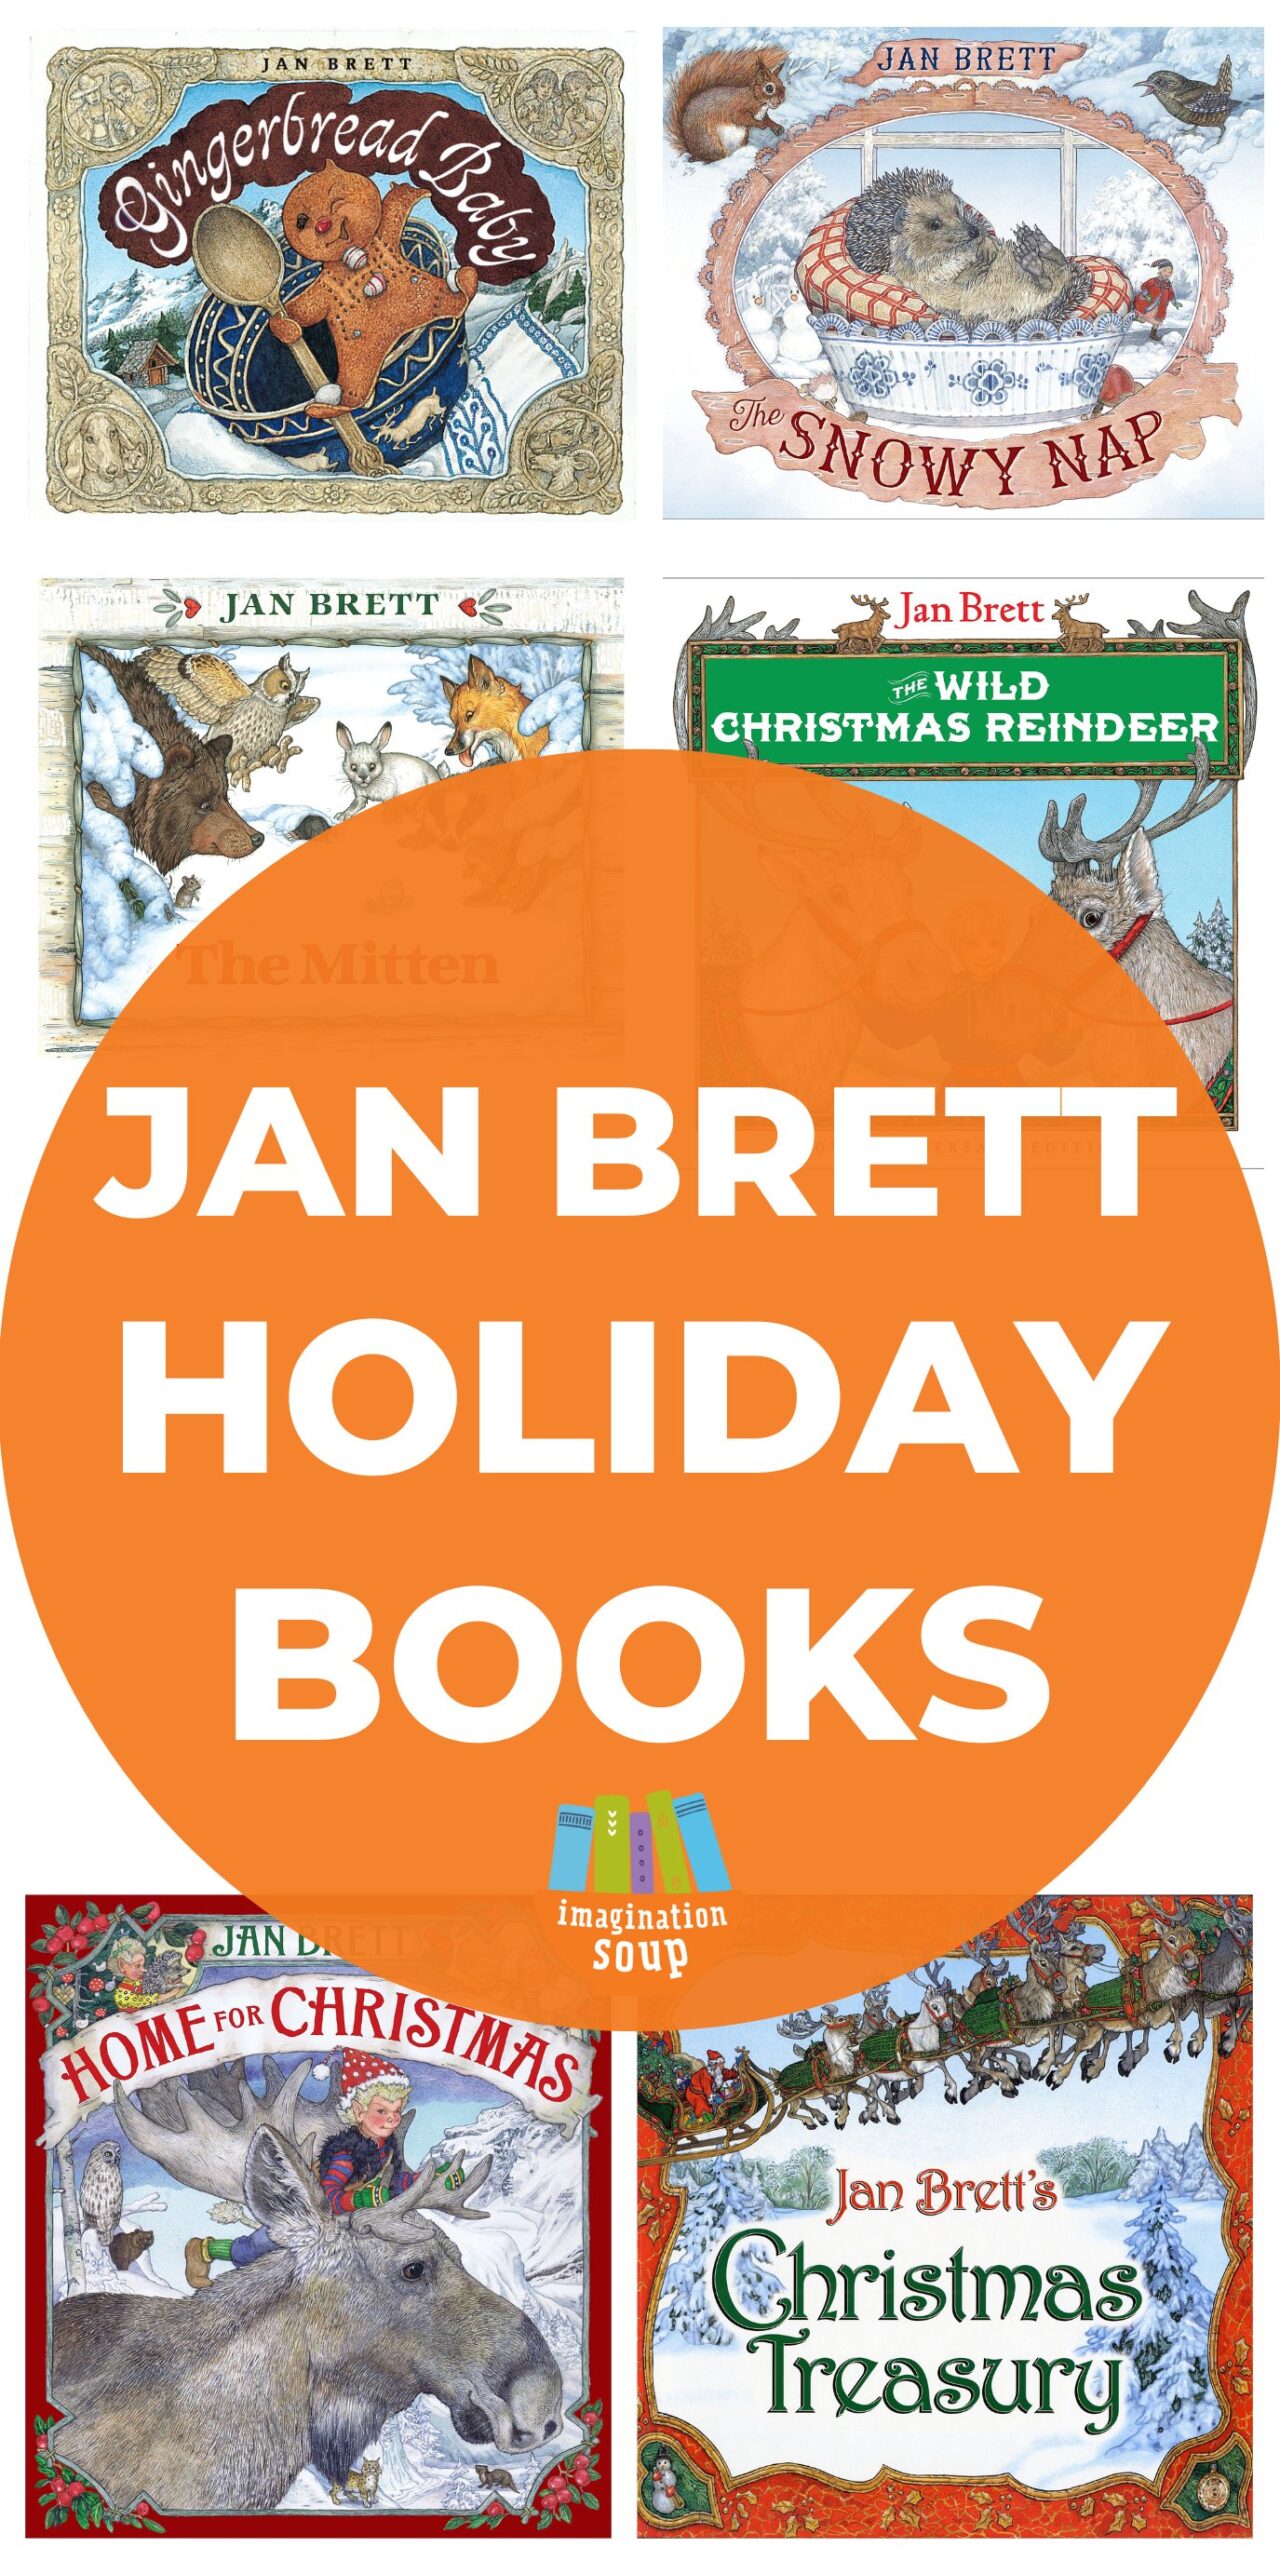 Jan Brett is a children's picture book author and illustrator famous for her evocative illustrations and intricate borders, usually with stories that are folklore or northern European in origin. Her writing tells a story, and so do her illustrations, especially the borders. Many of her stories are about winter and Christmas. Let's dive into those books, in particular.